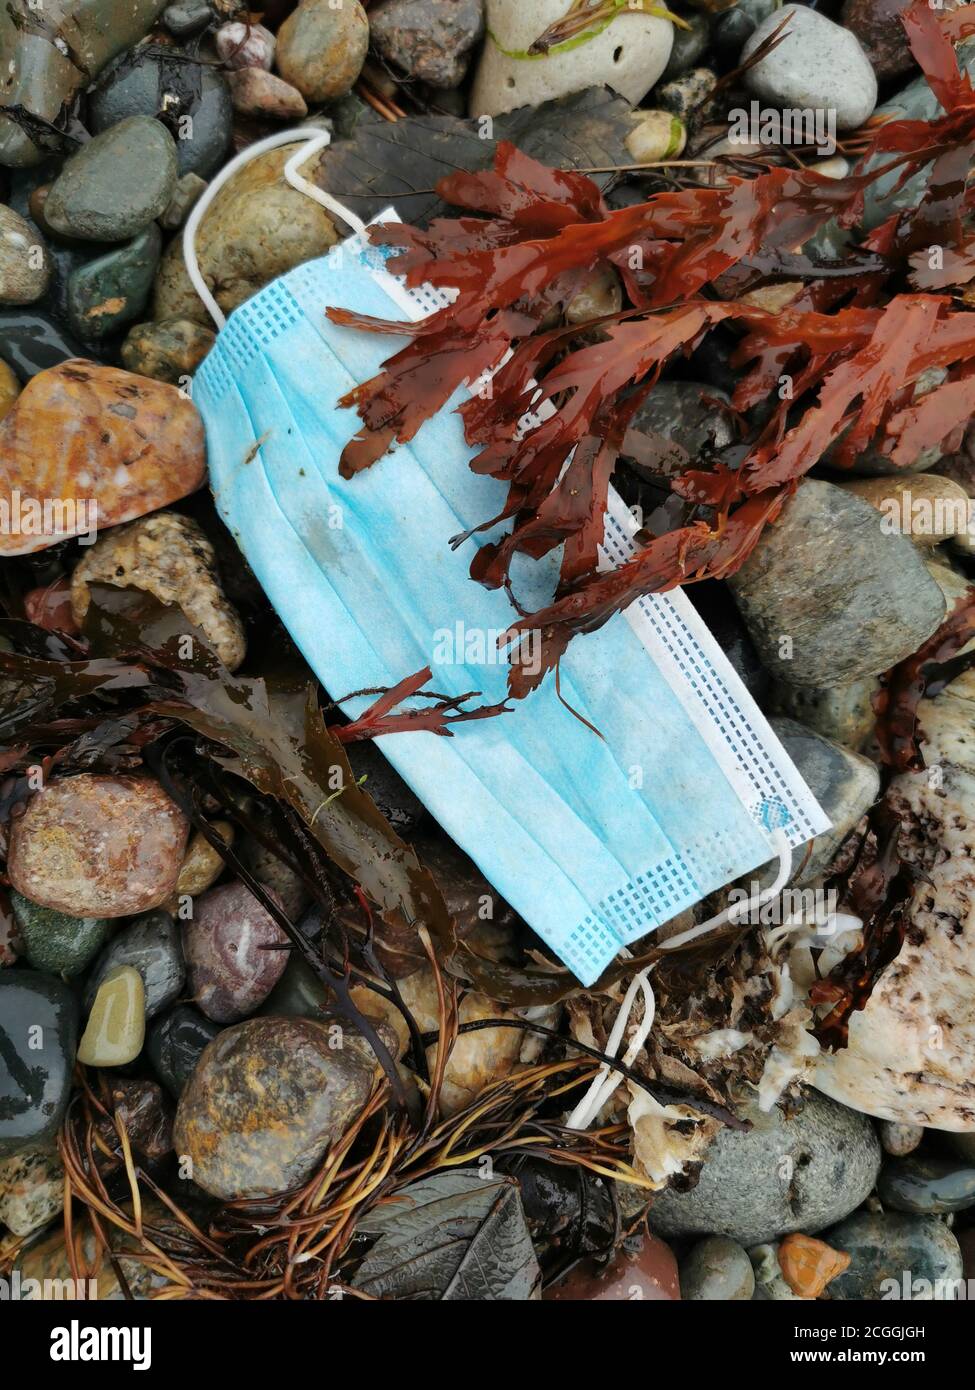 Covid 19 protective mask found washed up on UK beach in 2020, contributing to pollution of the ebvironment. Stock Photo